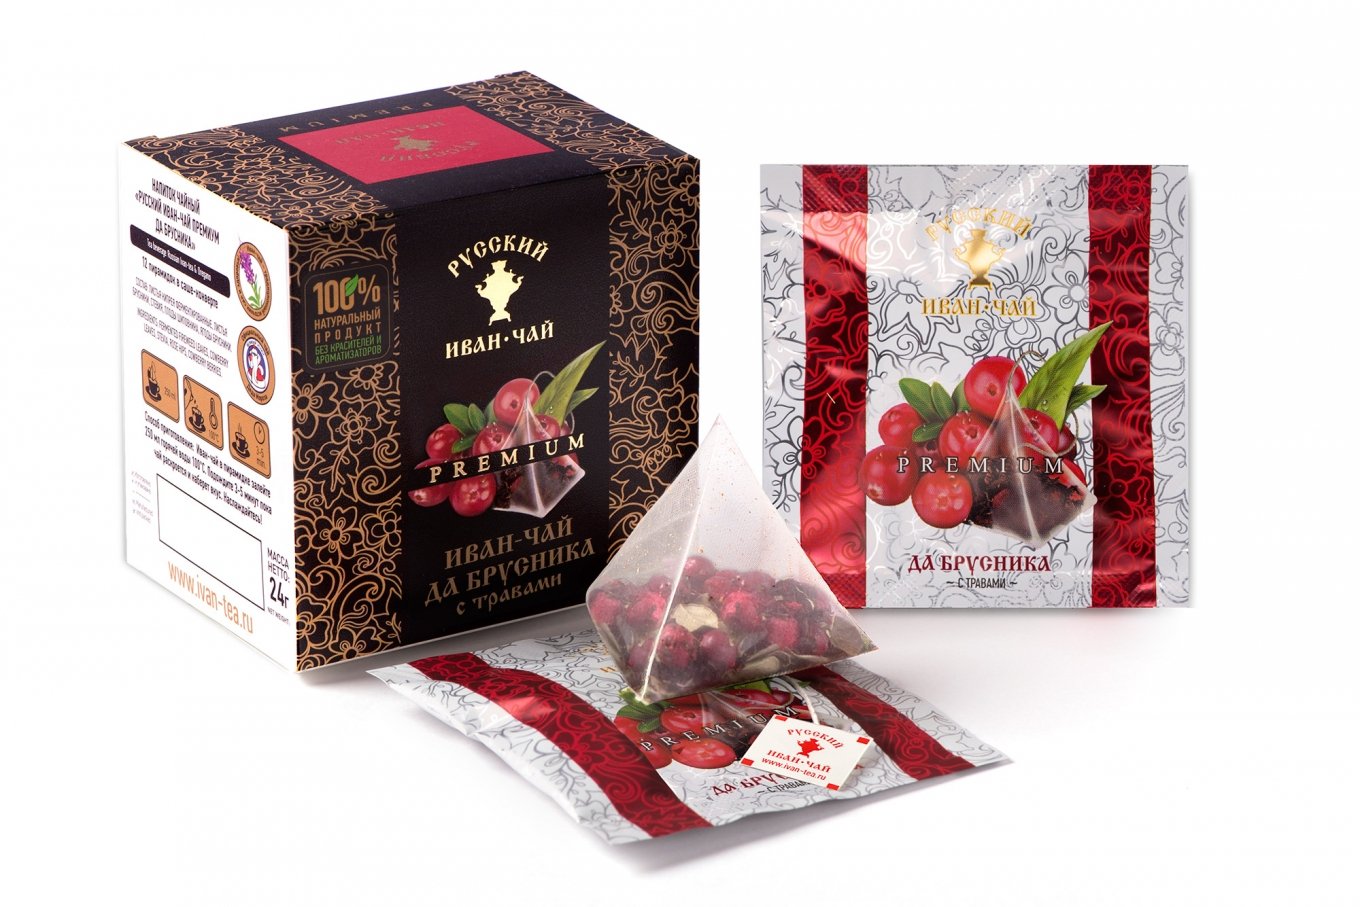 Premium Ivan-Tea and Lingonberry with Herbs, 12 pyramids